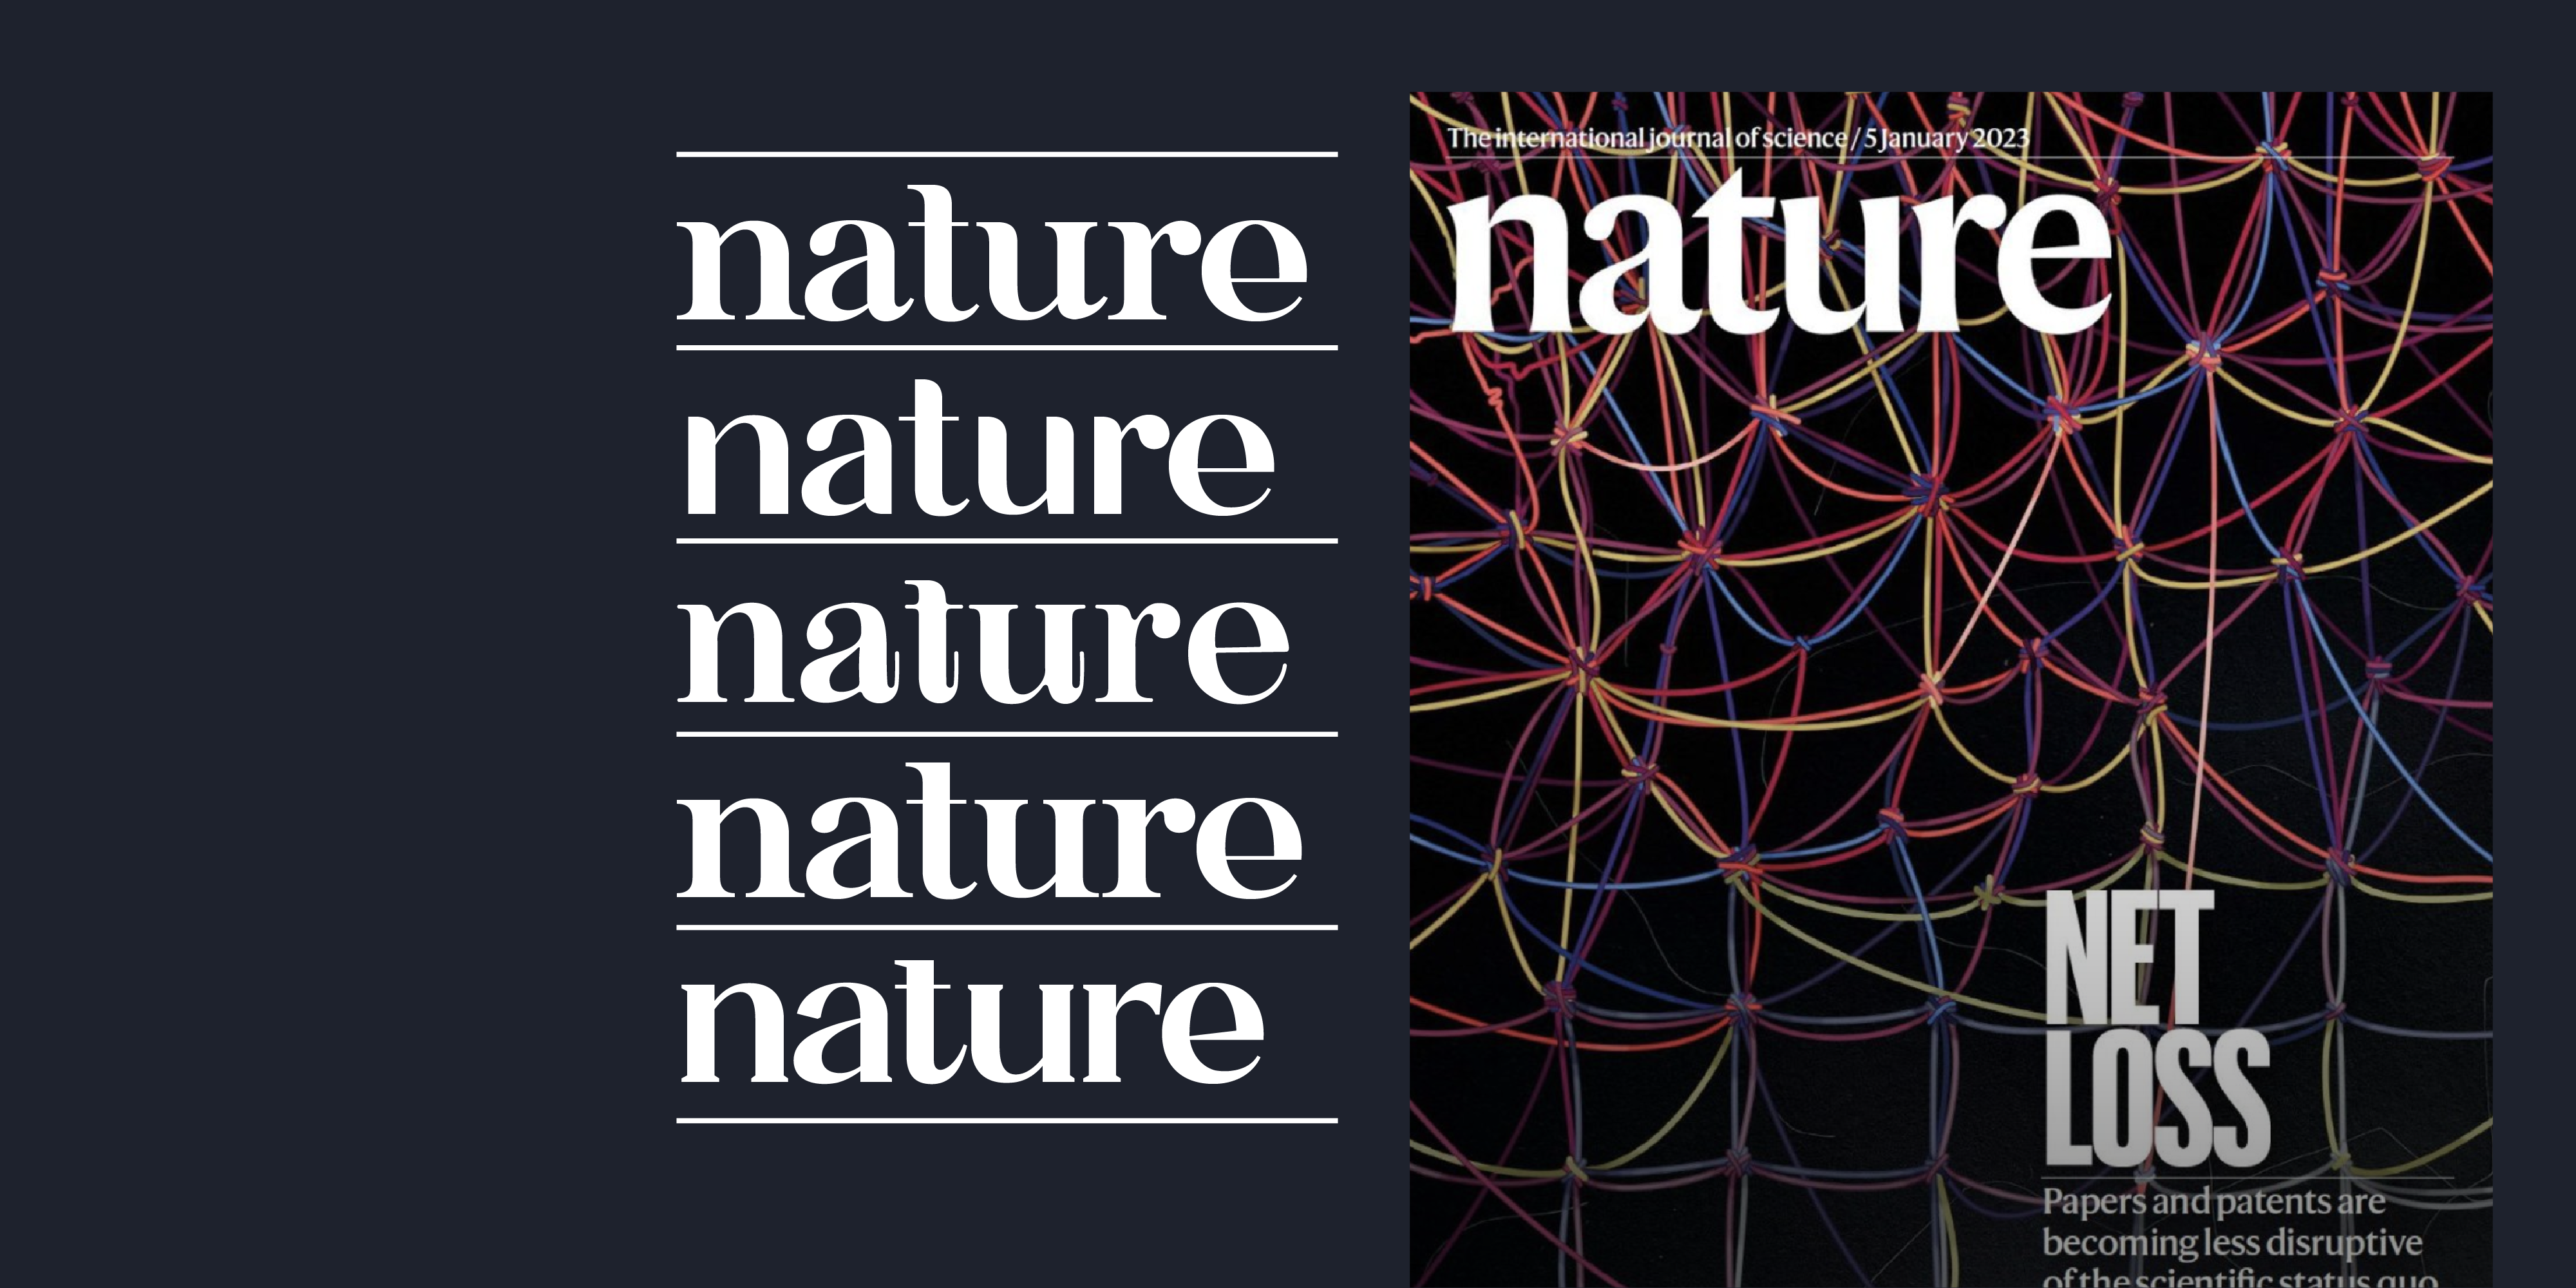 5 Typefaces similar to the Nature Journal font